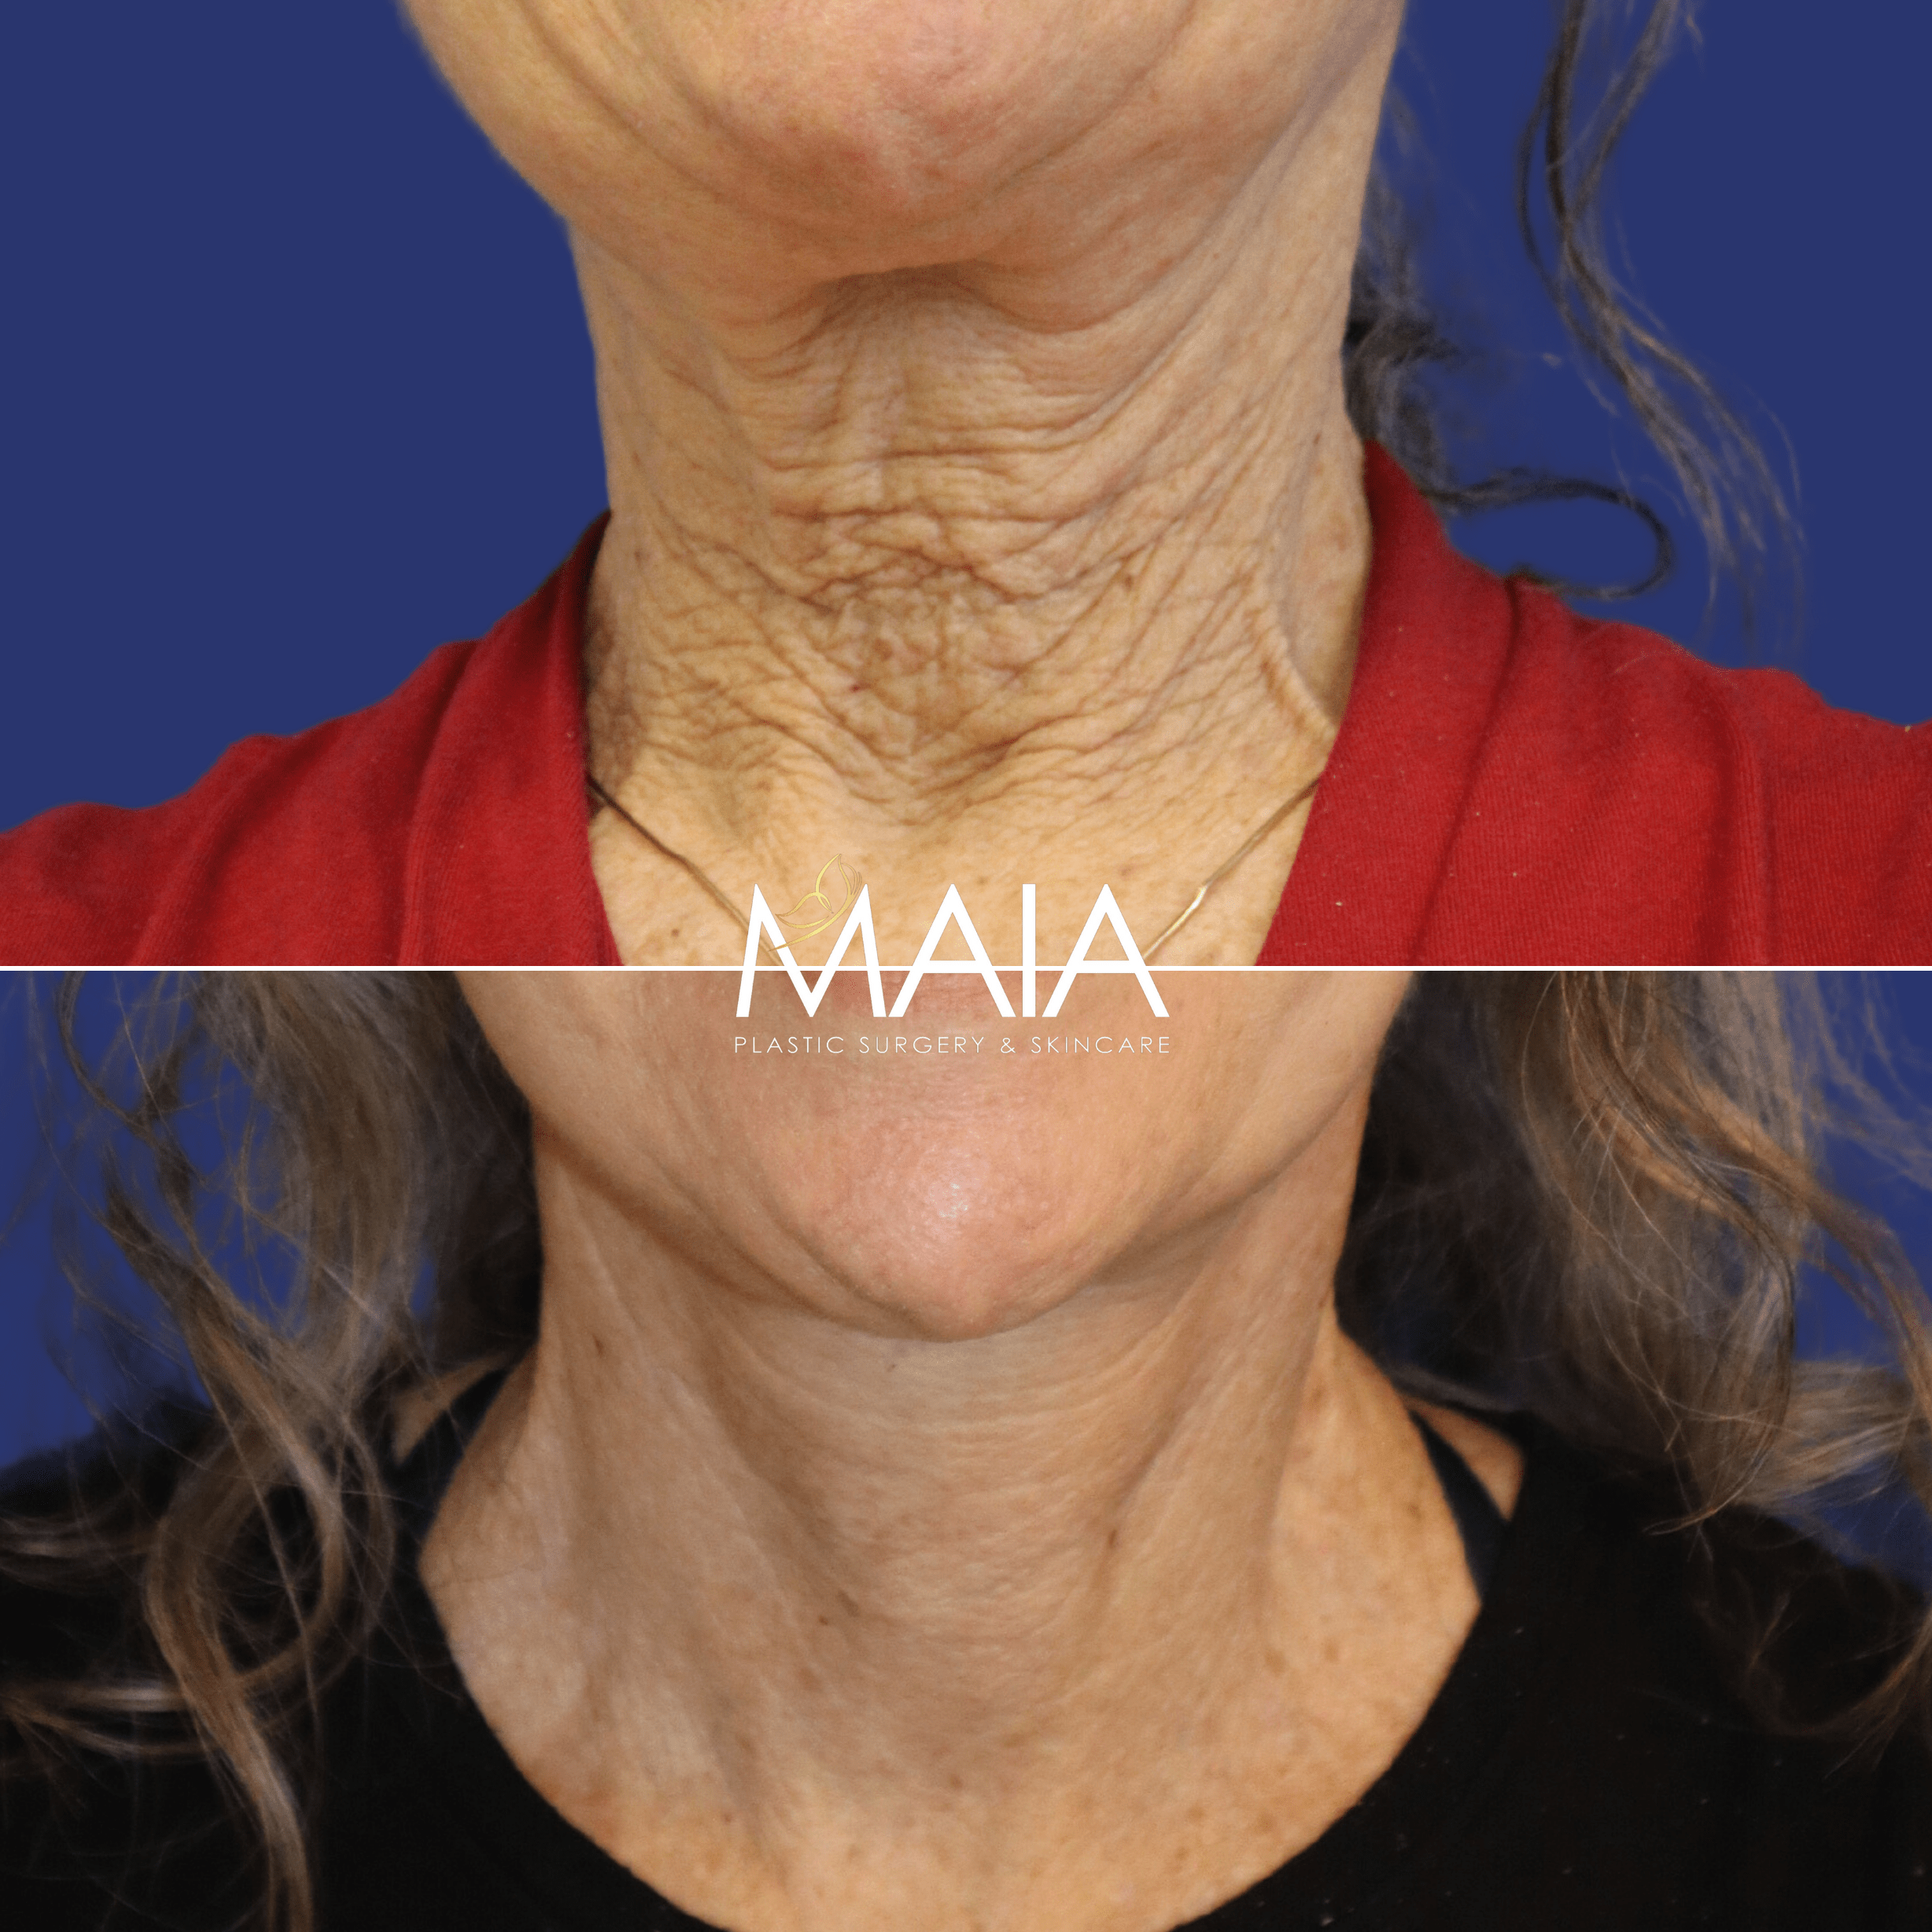 65 year-old patient before and 6 weeks after face and neck lift